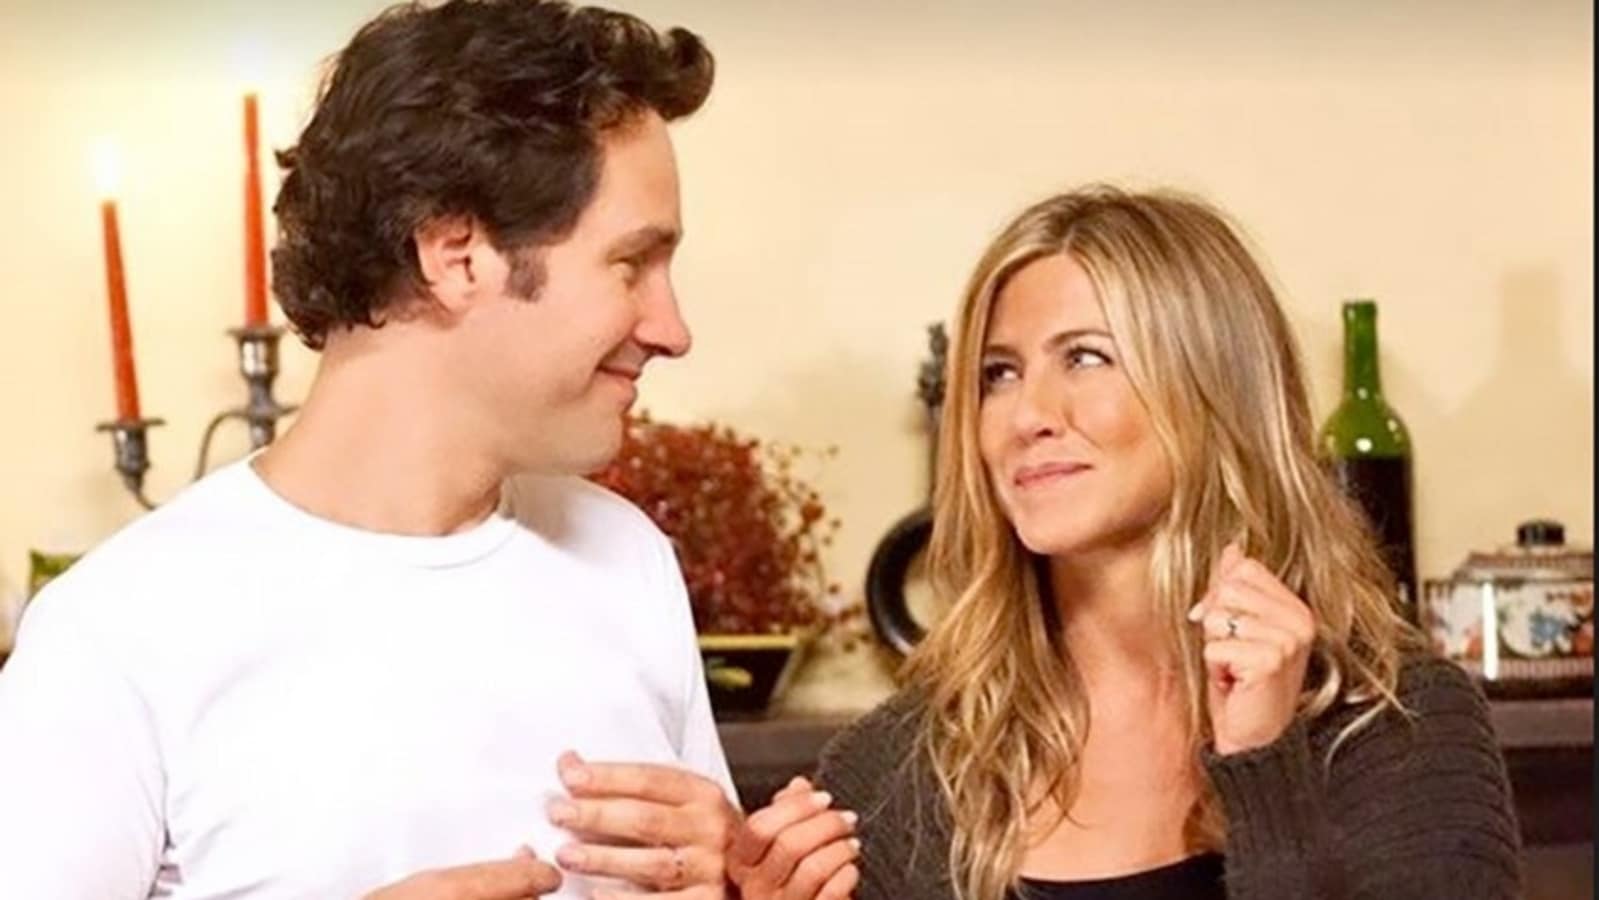 Jennifer Aniston shares a warm goodbye with male friend in Milan